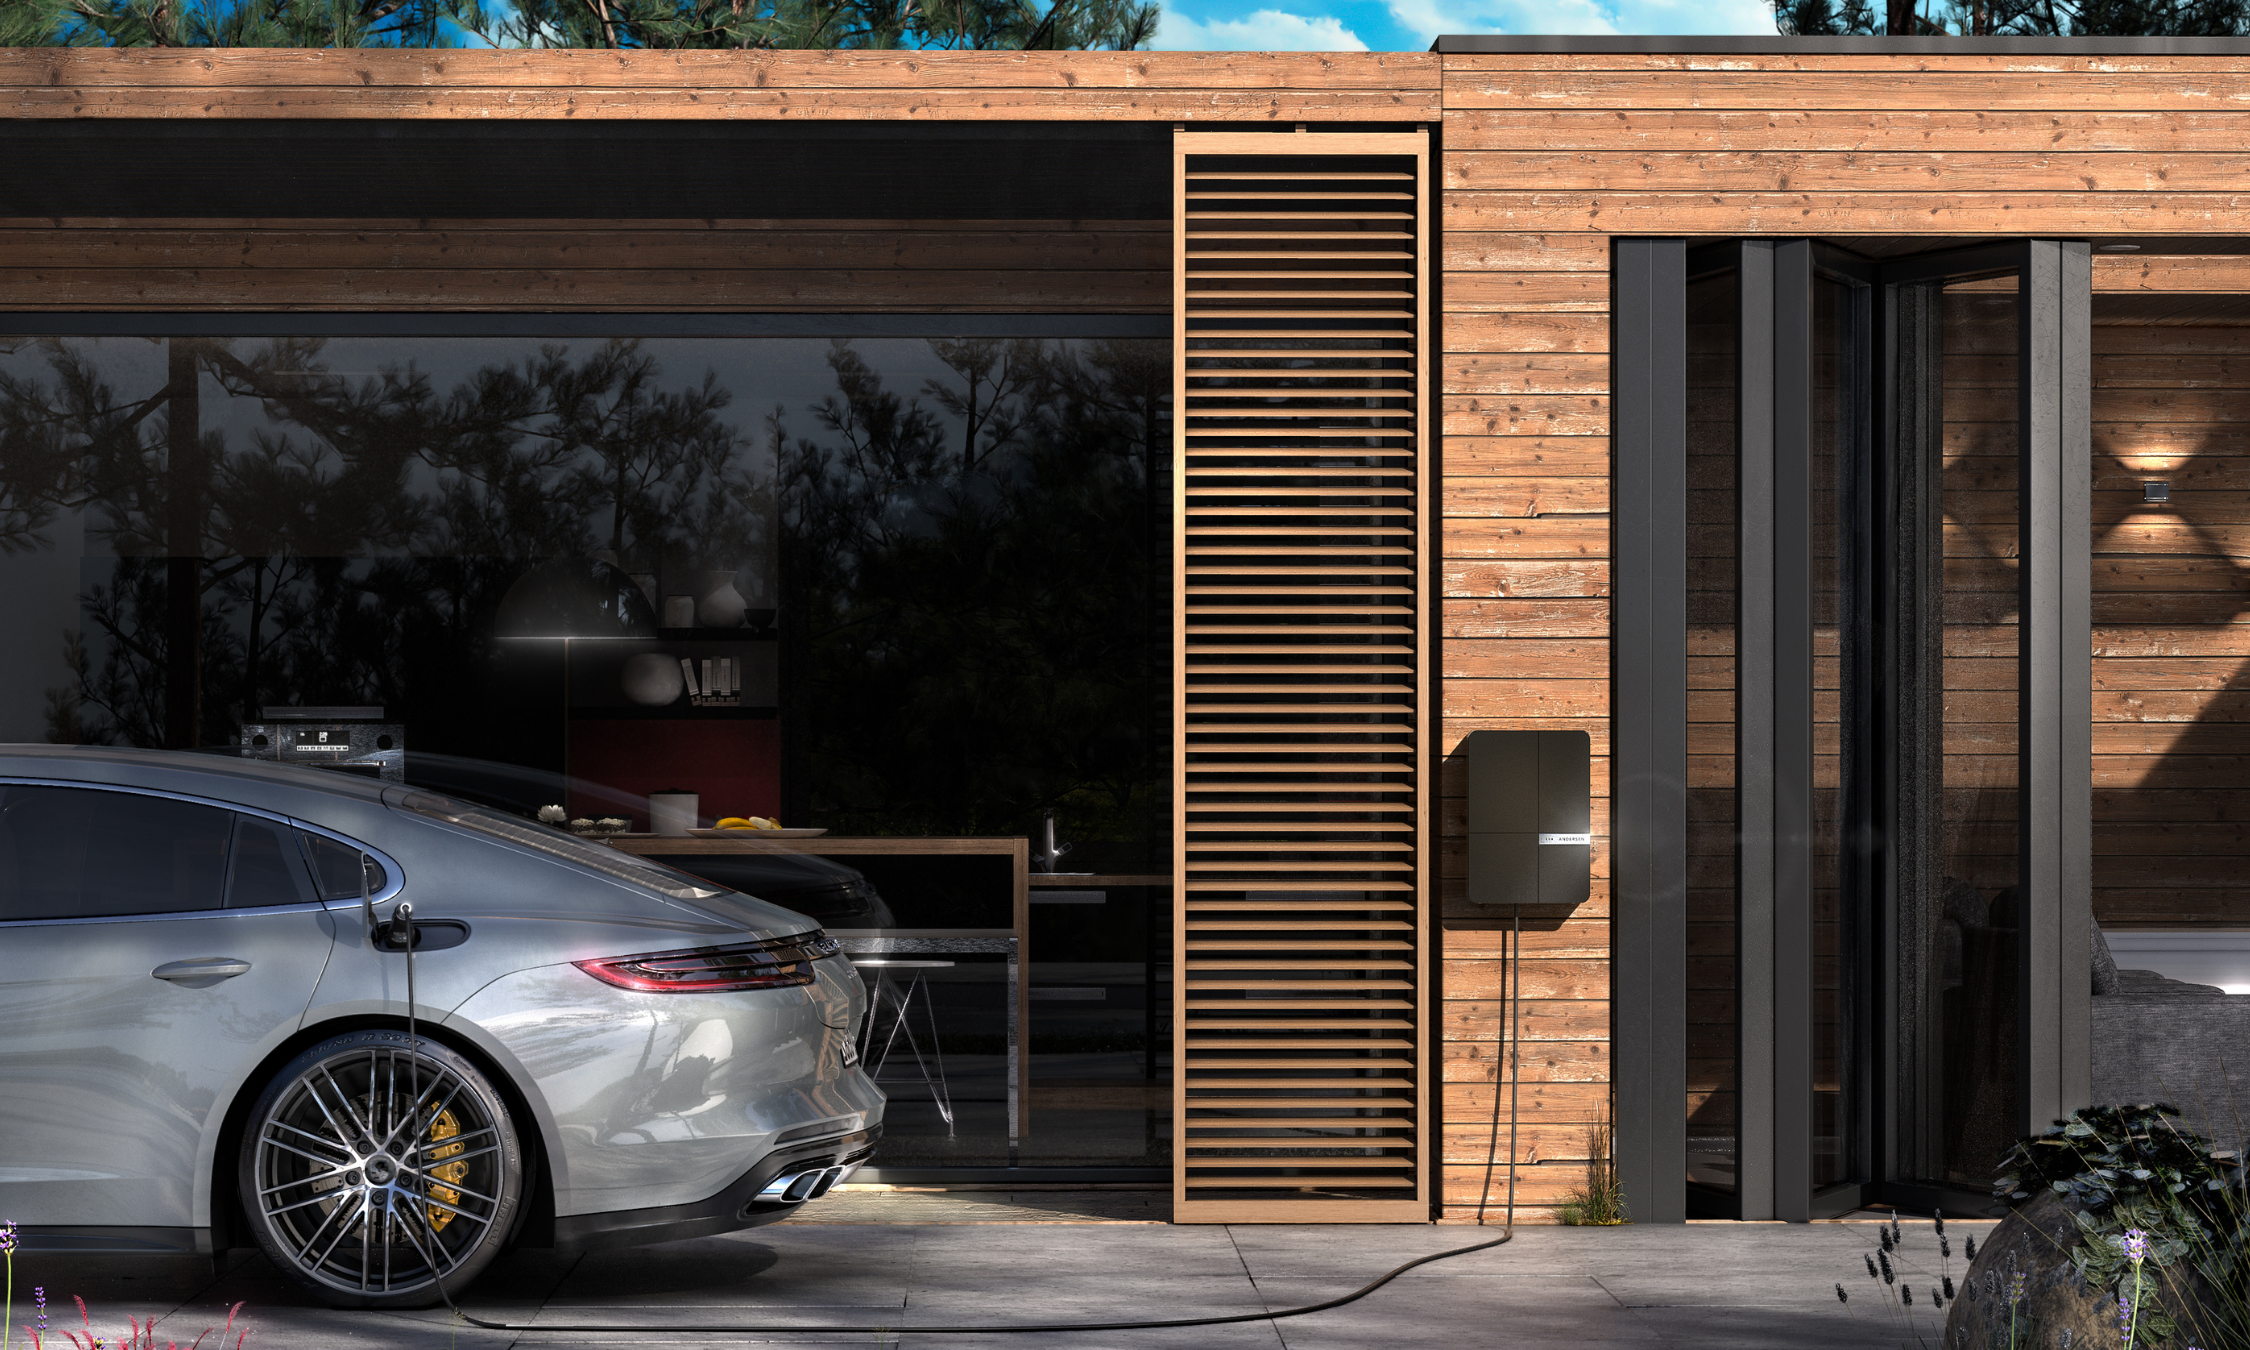 Andersen EV collaborates with University of Creative Arts to inspire next generation of designers